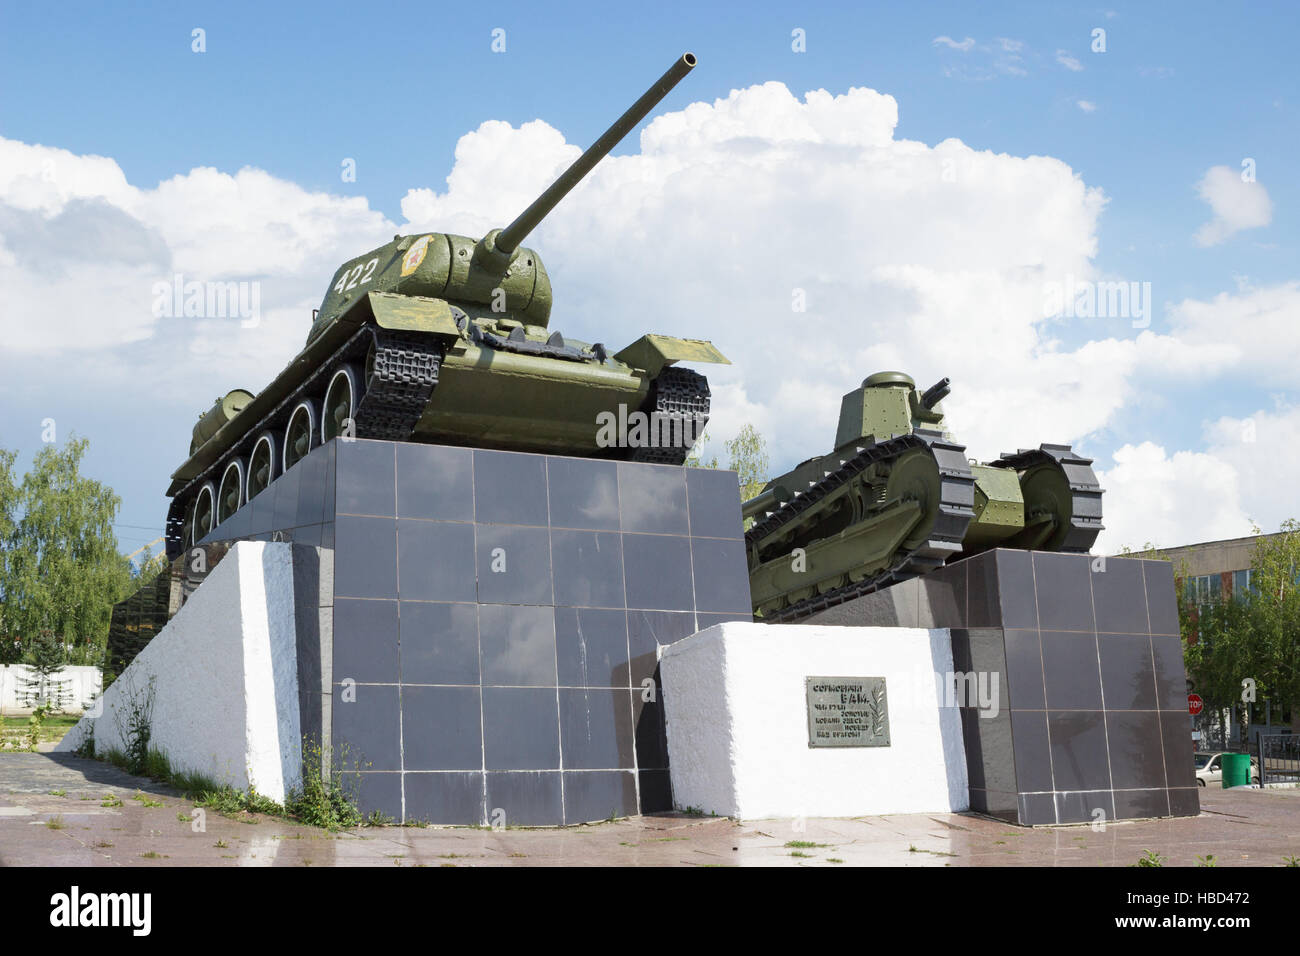 T-34 tank and first russian Soviet tank Stock Photo